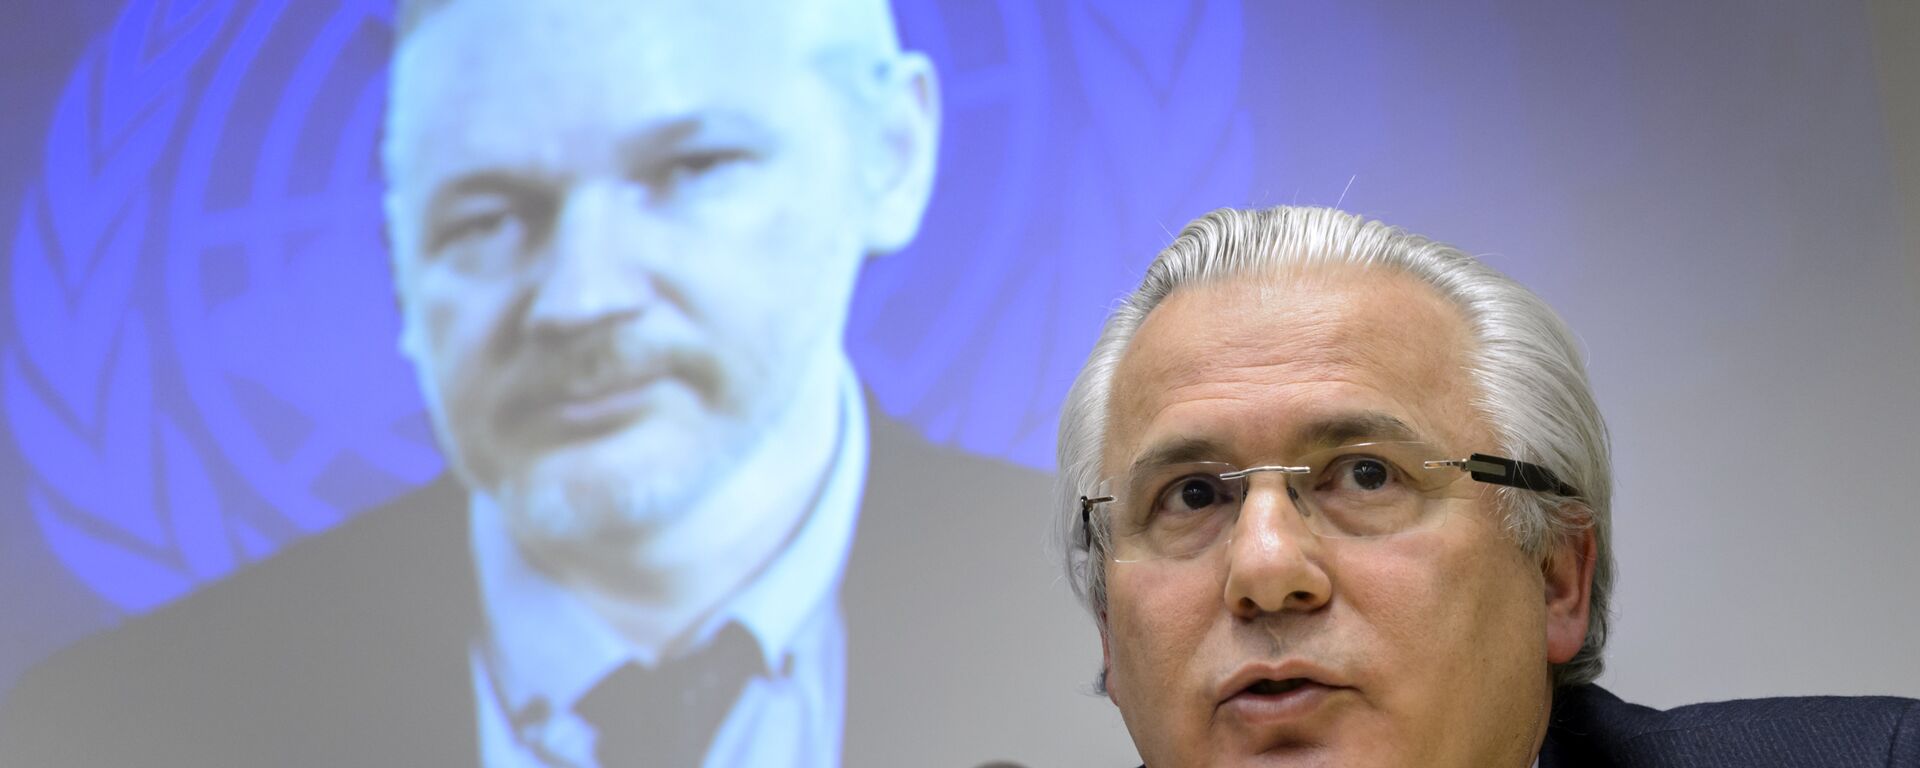 Spanish former judge Baltasar Garzon (R) speaks beneath WikiLeaks founder Julian Assange seen on a screen via web cast from the Ecuadorian Embassy in London during an event on the sideline of the United Nations (UN) Human Rights Council session on March 23, 2015 in Geneva. - Sputnik Mundo, 1920, 23.07.2021